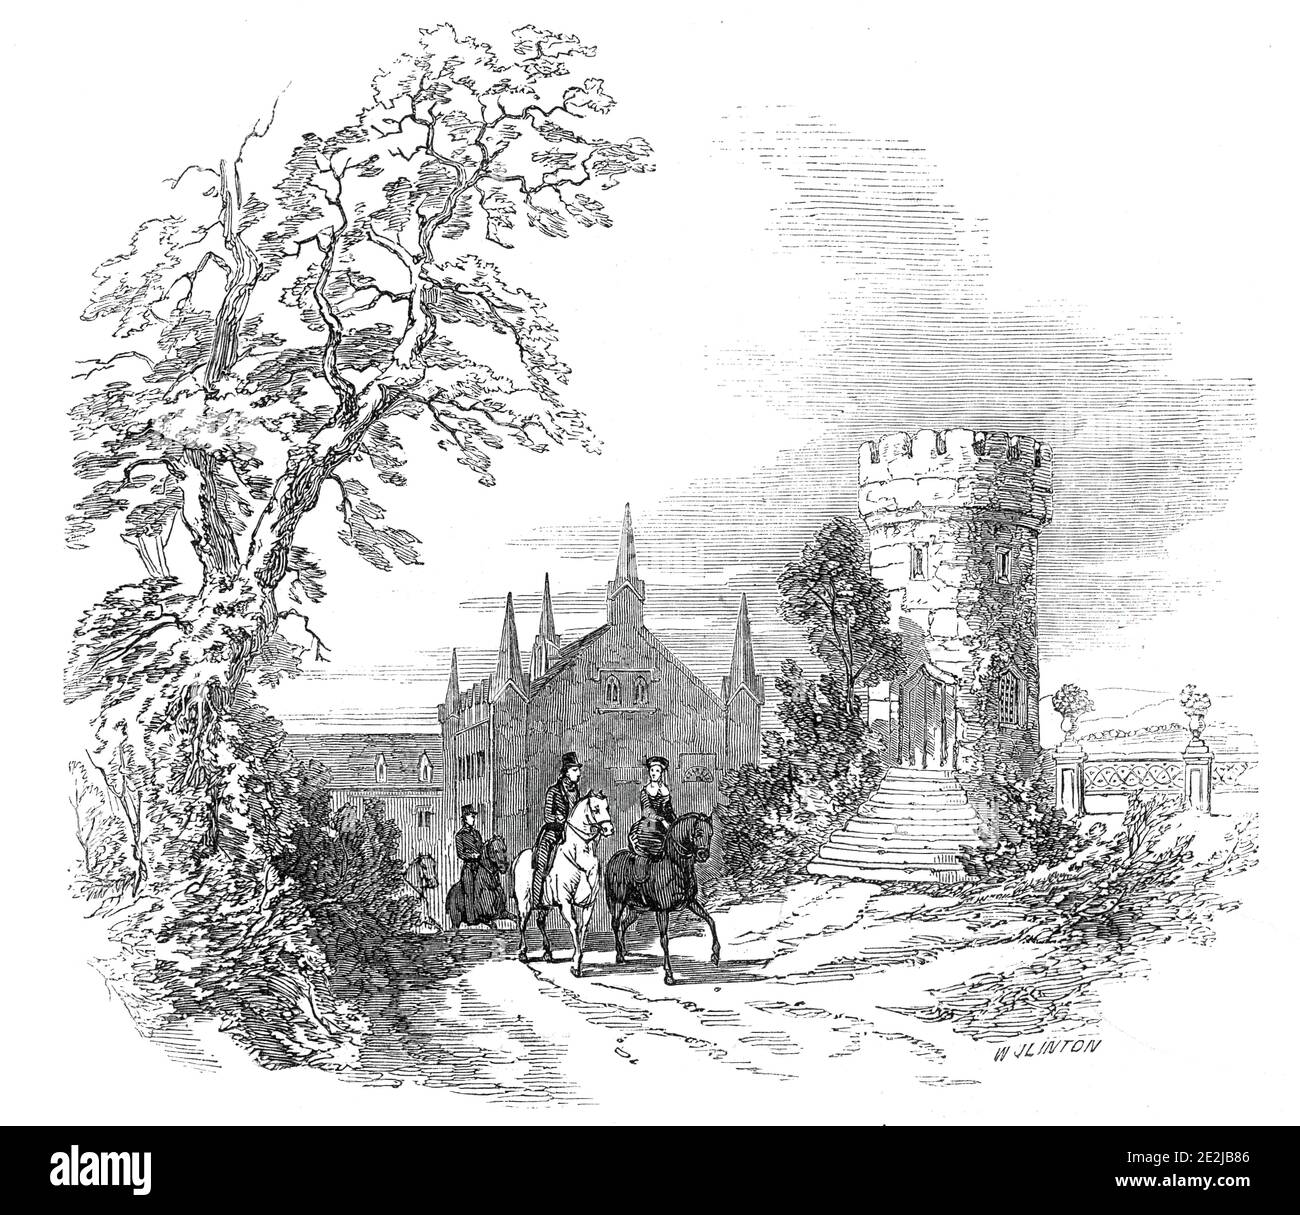 Rosenau - from His Royal Highness Prince Albert's drawing, 1845. View of the Rosenau Palace, a former castle, converted into a ducal country house, (formerly in Saxe-Coburg, now in Bavaria, Germany). Rosenau was the birthplace and boyhood home of Prince Albert of Saxe-Coburg and Gotha, husband and consort of Queen Victoria. From &quot;Illustrated London News&quot;, 1845, Vol VII. Stock Photo